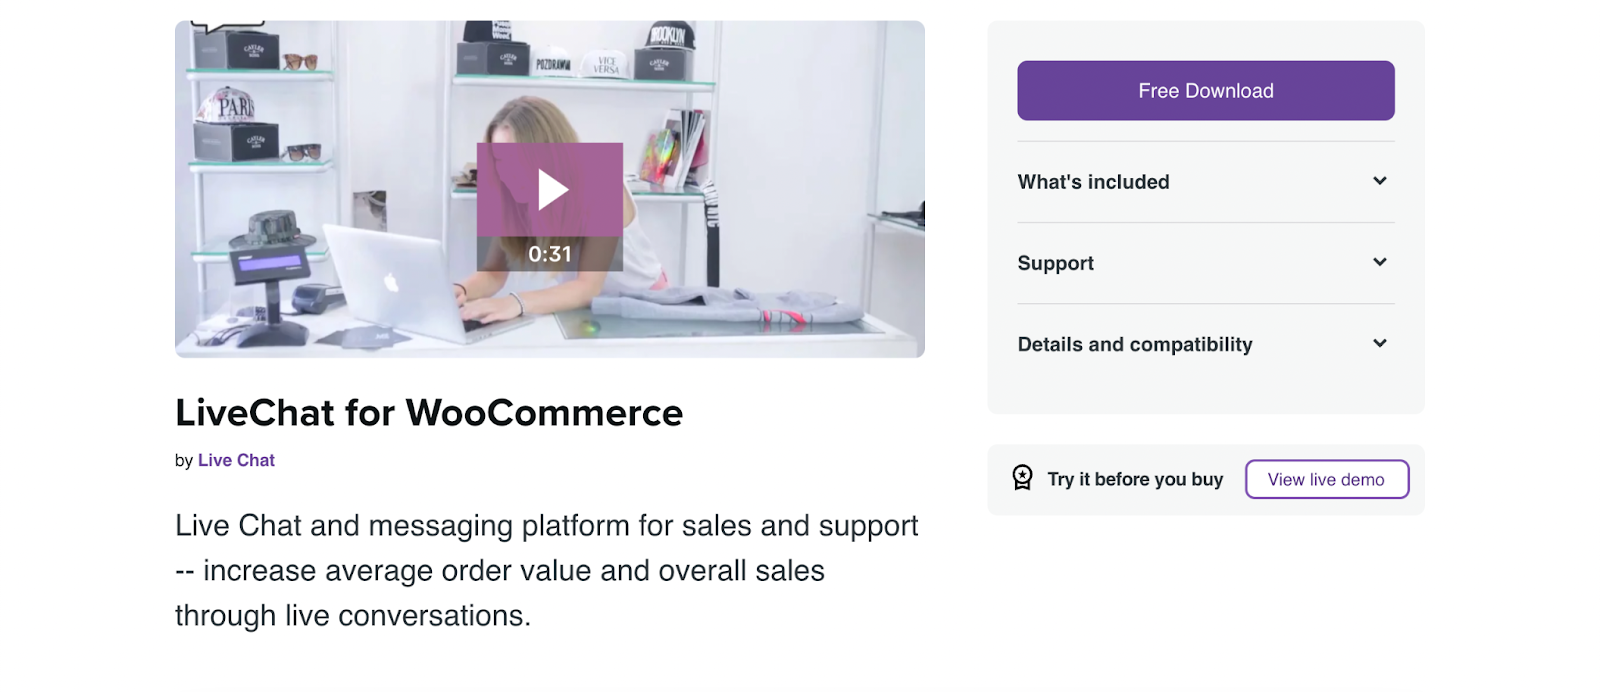 livechat for woocommerce dropshipping